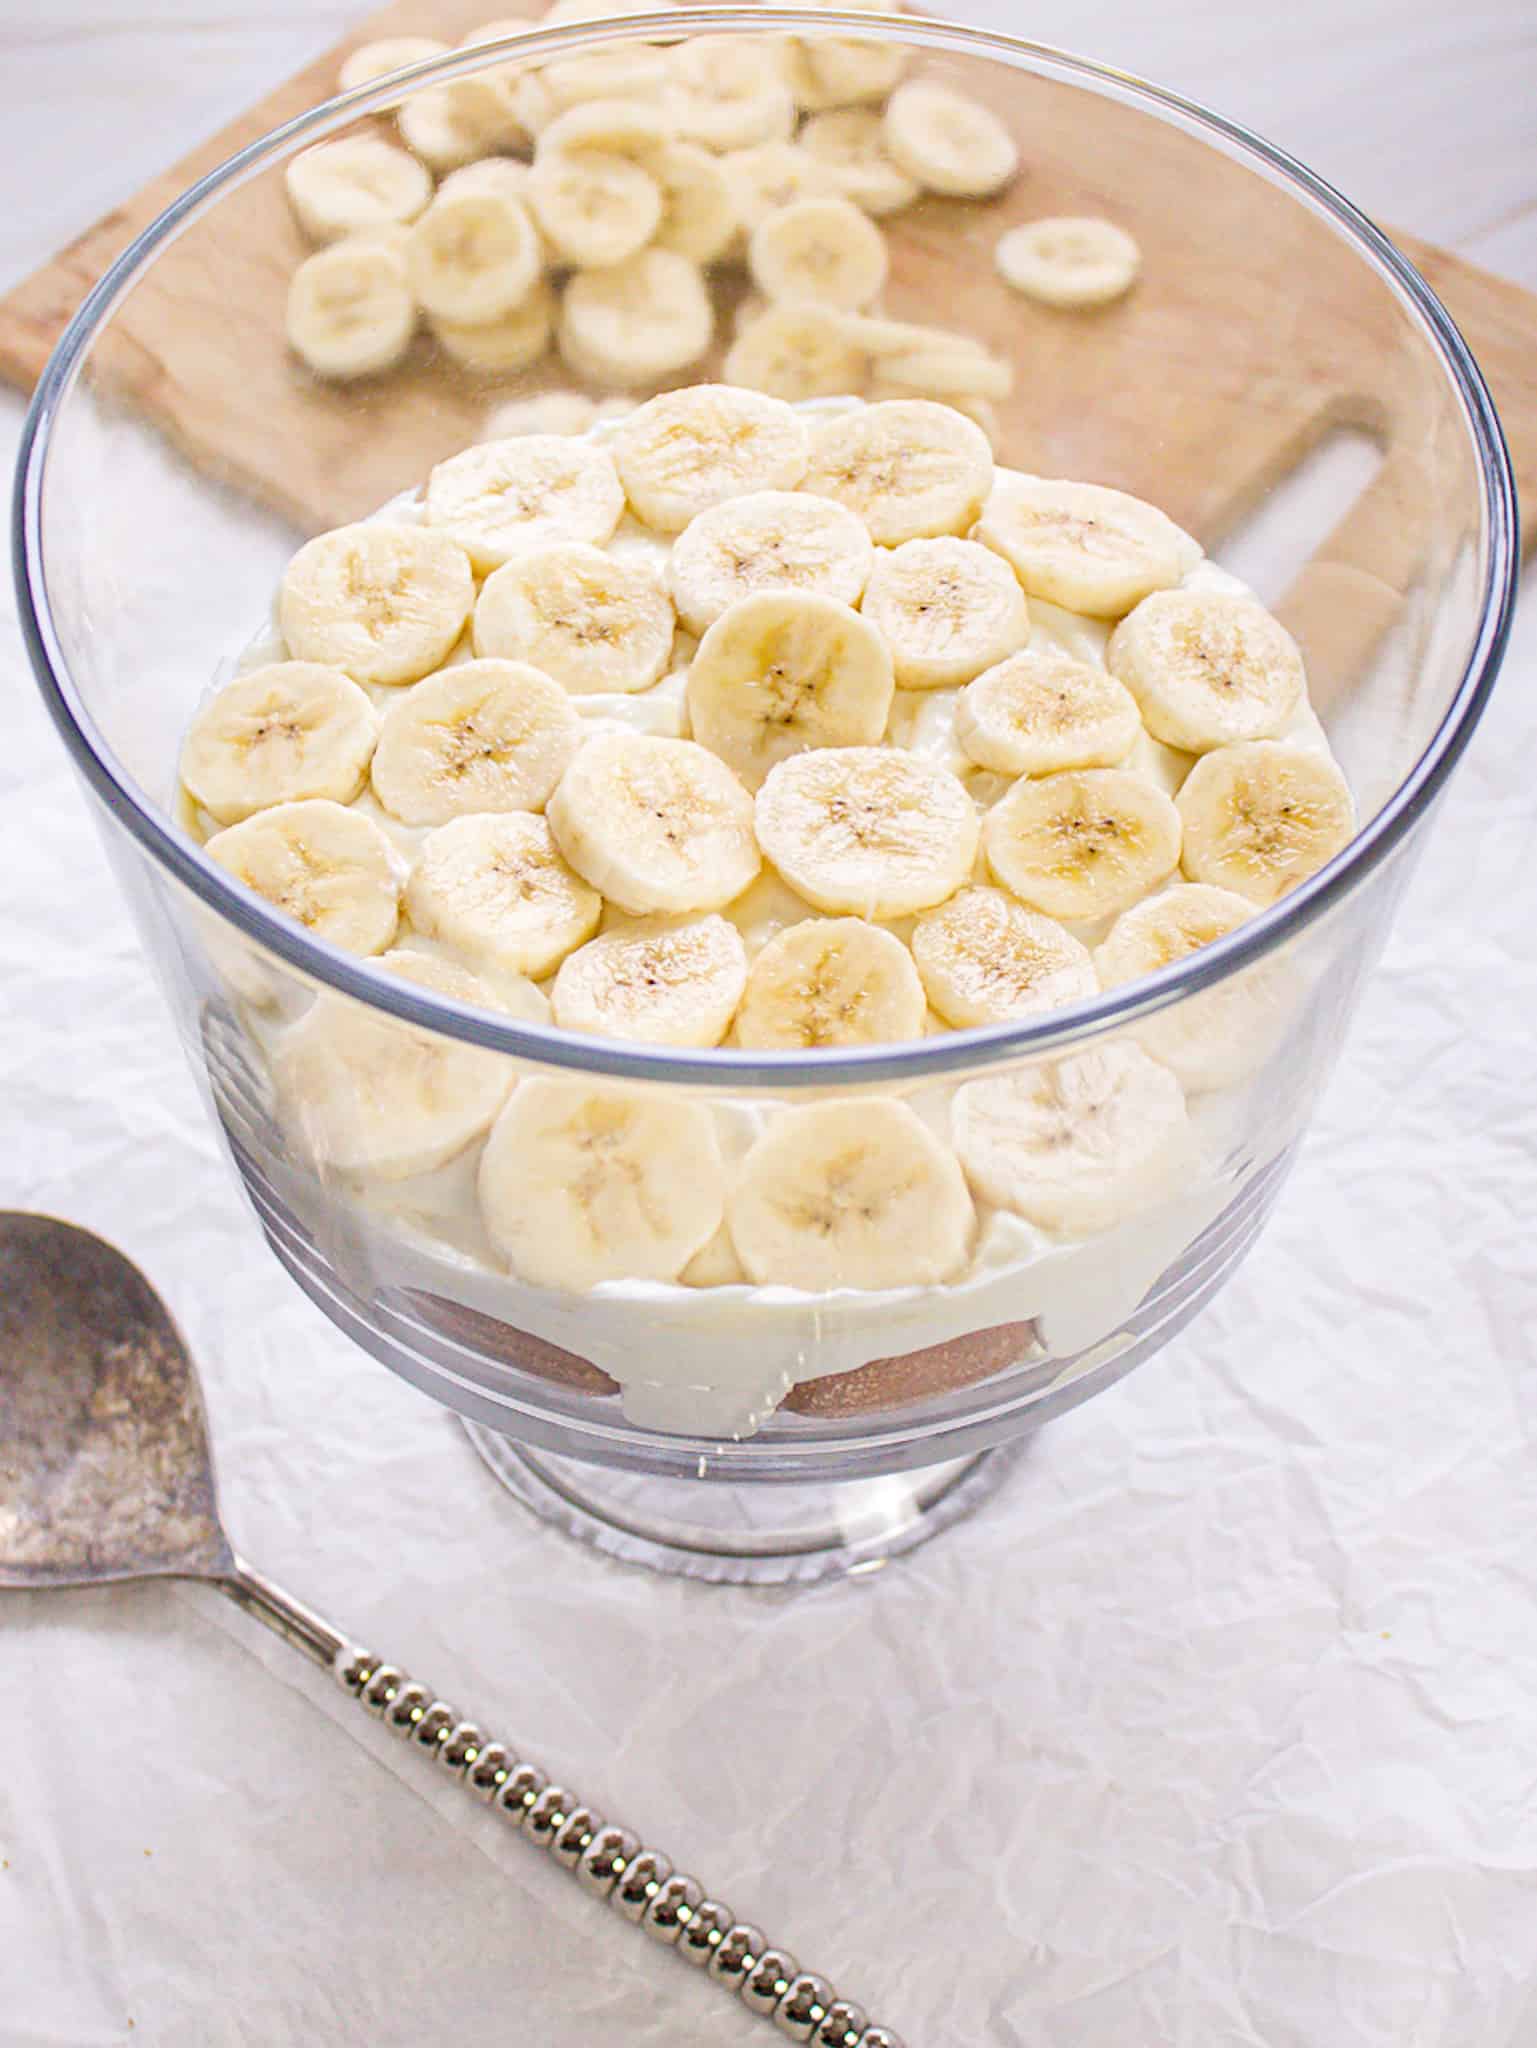 Layer of bananas on top of pudding layer